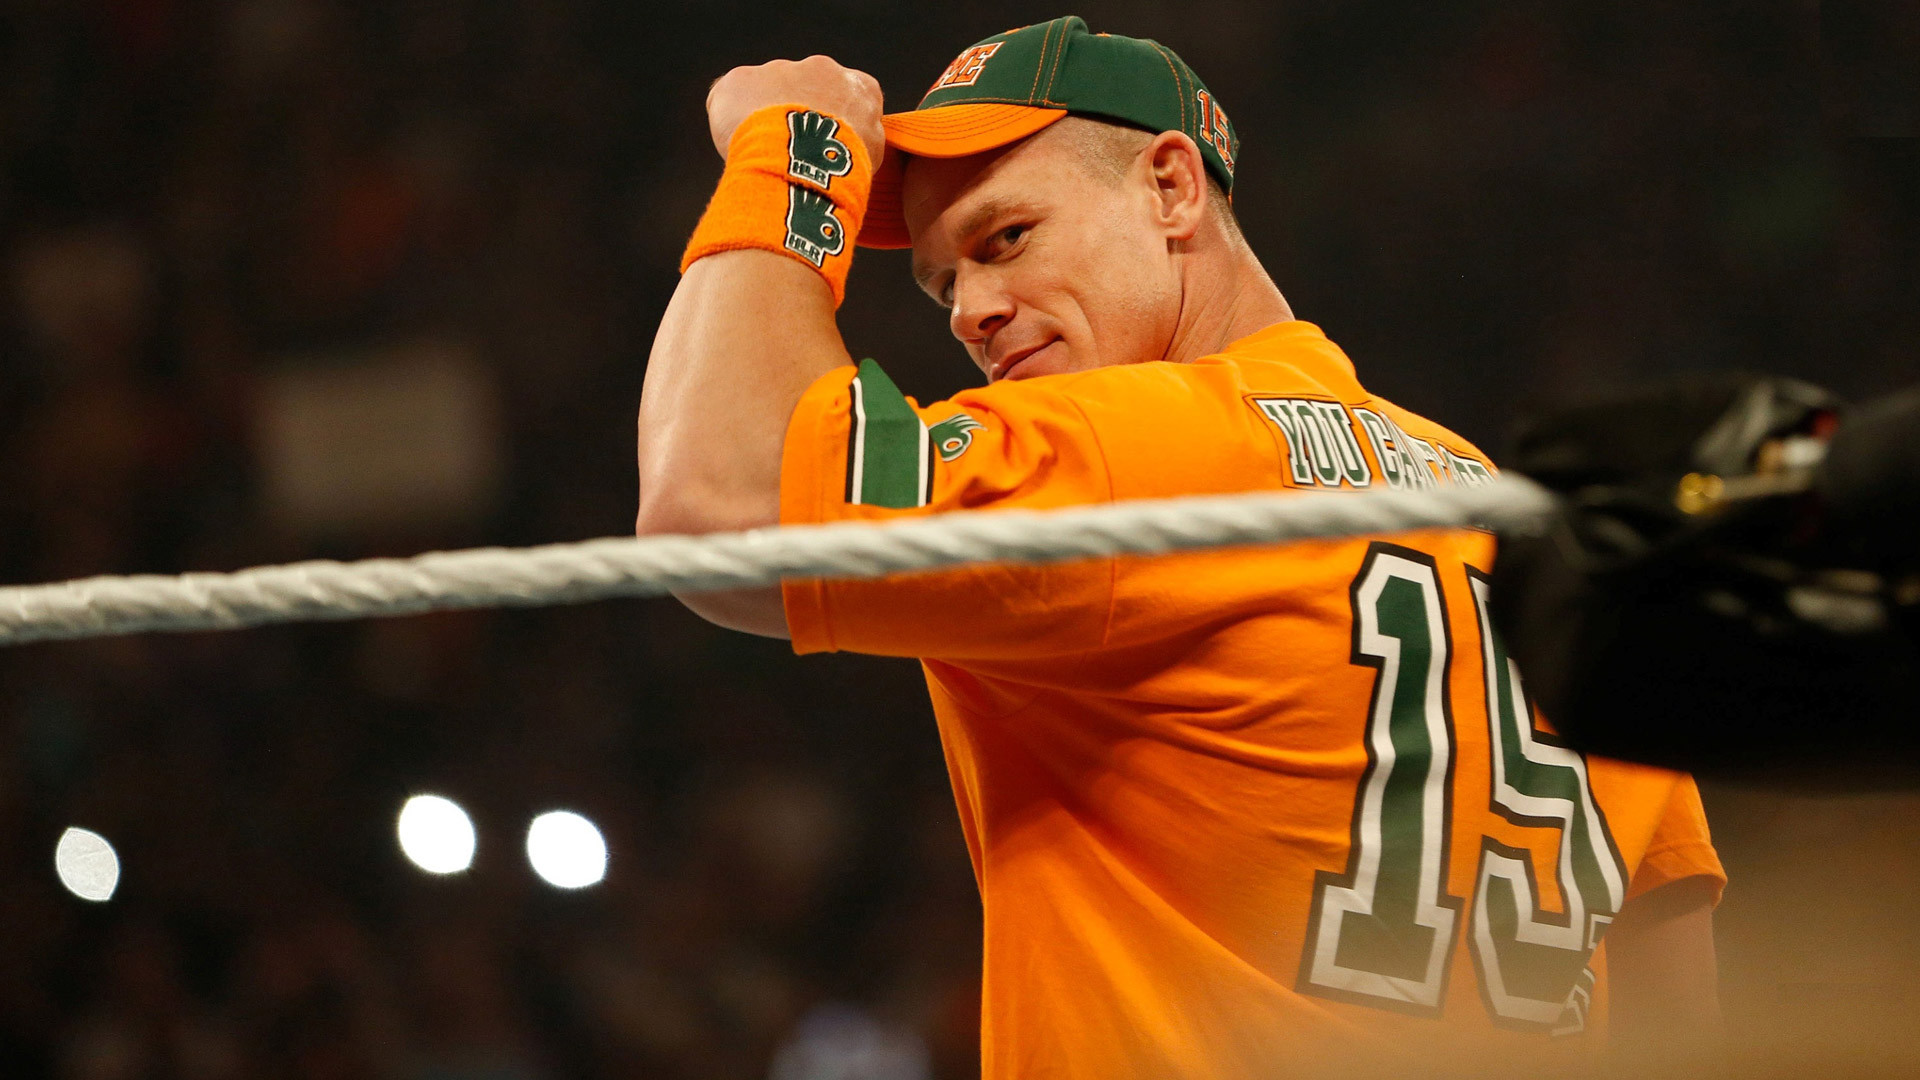 1920x1080 John Cena Wallpapers HD Wallpapers Backgrounds of Your Choice 2560Ã1440  John Cena Hd Wallpapers (63 Wallpapers) | Adorable Wallpapers | Desktop |  Pinterest ...